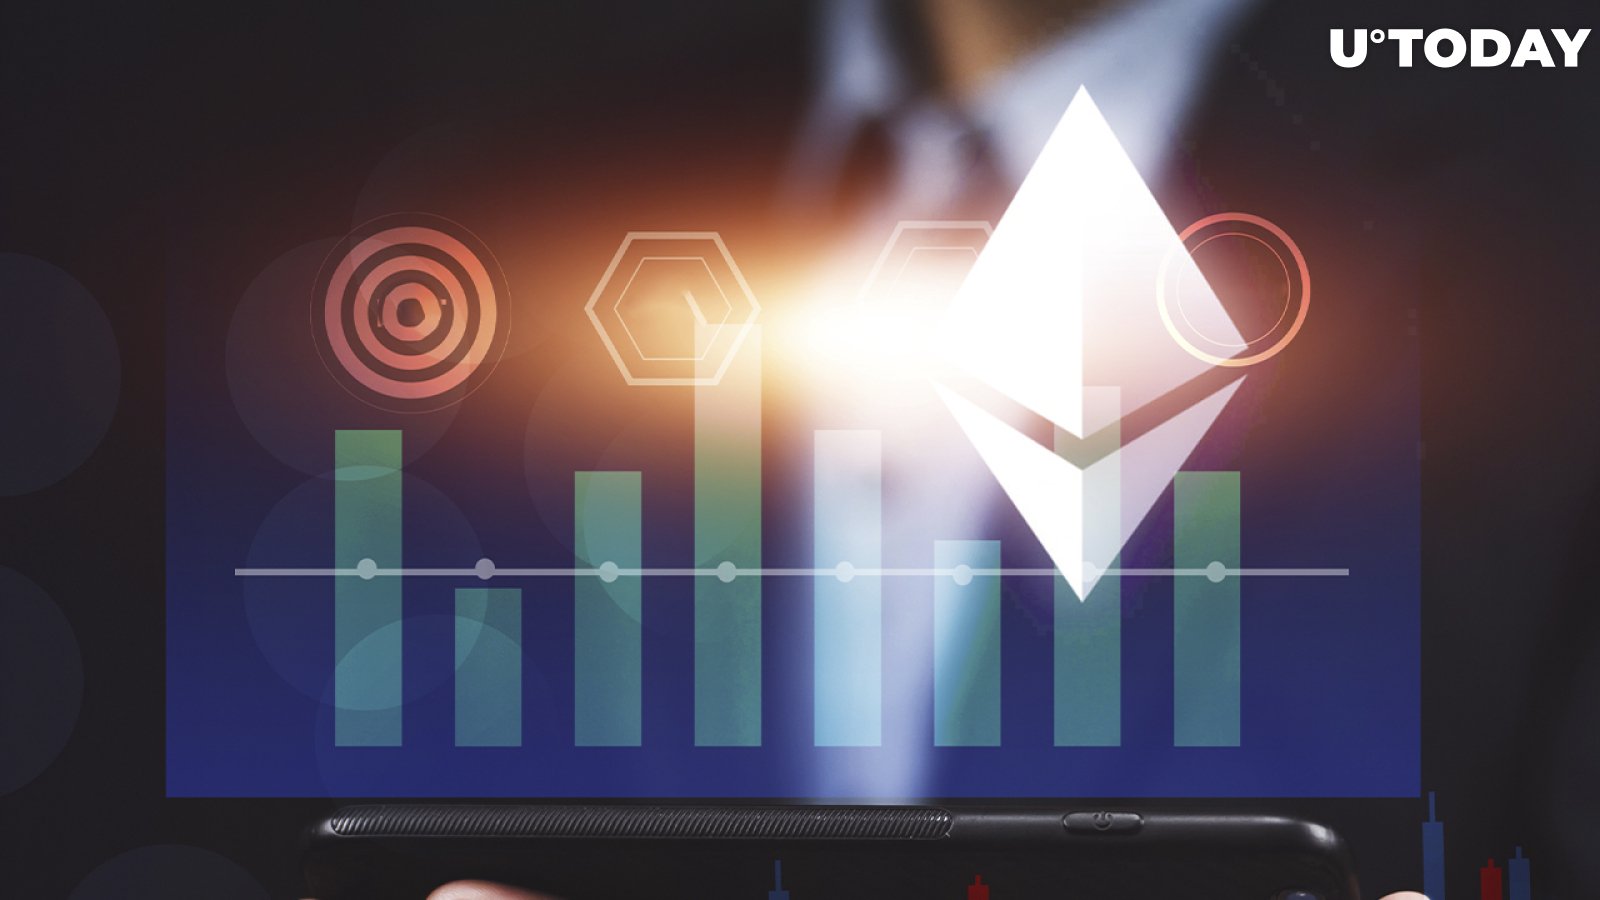 $5.4 Billion ETH Already Burned with Almost 2,000 ETH Being Burned Daily